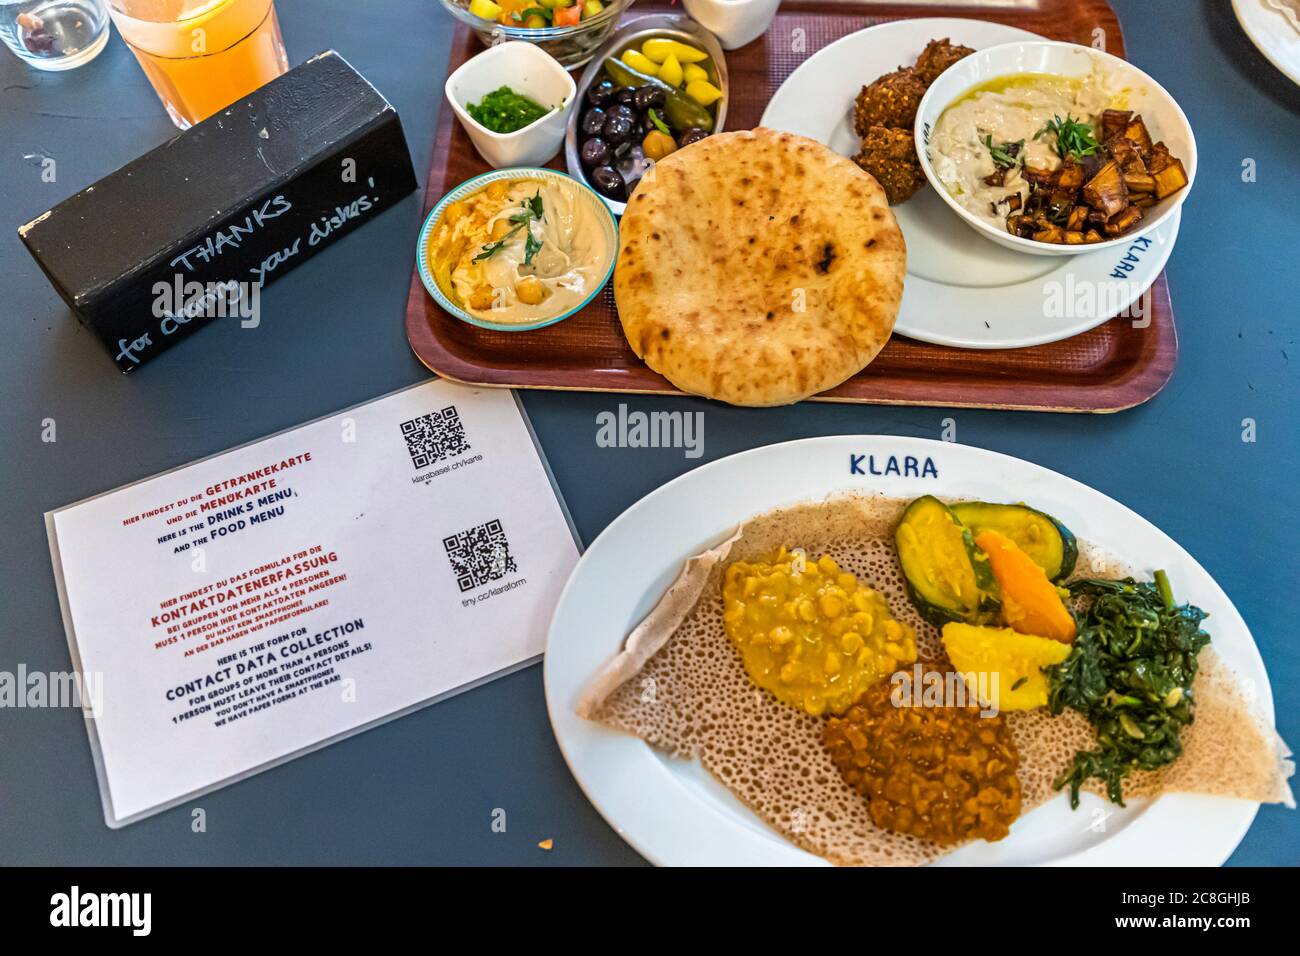 Klara Food Court during Corona Measures in Basel, Switzerland. Crossover cuisine: typical dishes from Eritrea and Israel including hygiene rules in Corona times. Stock Photo